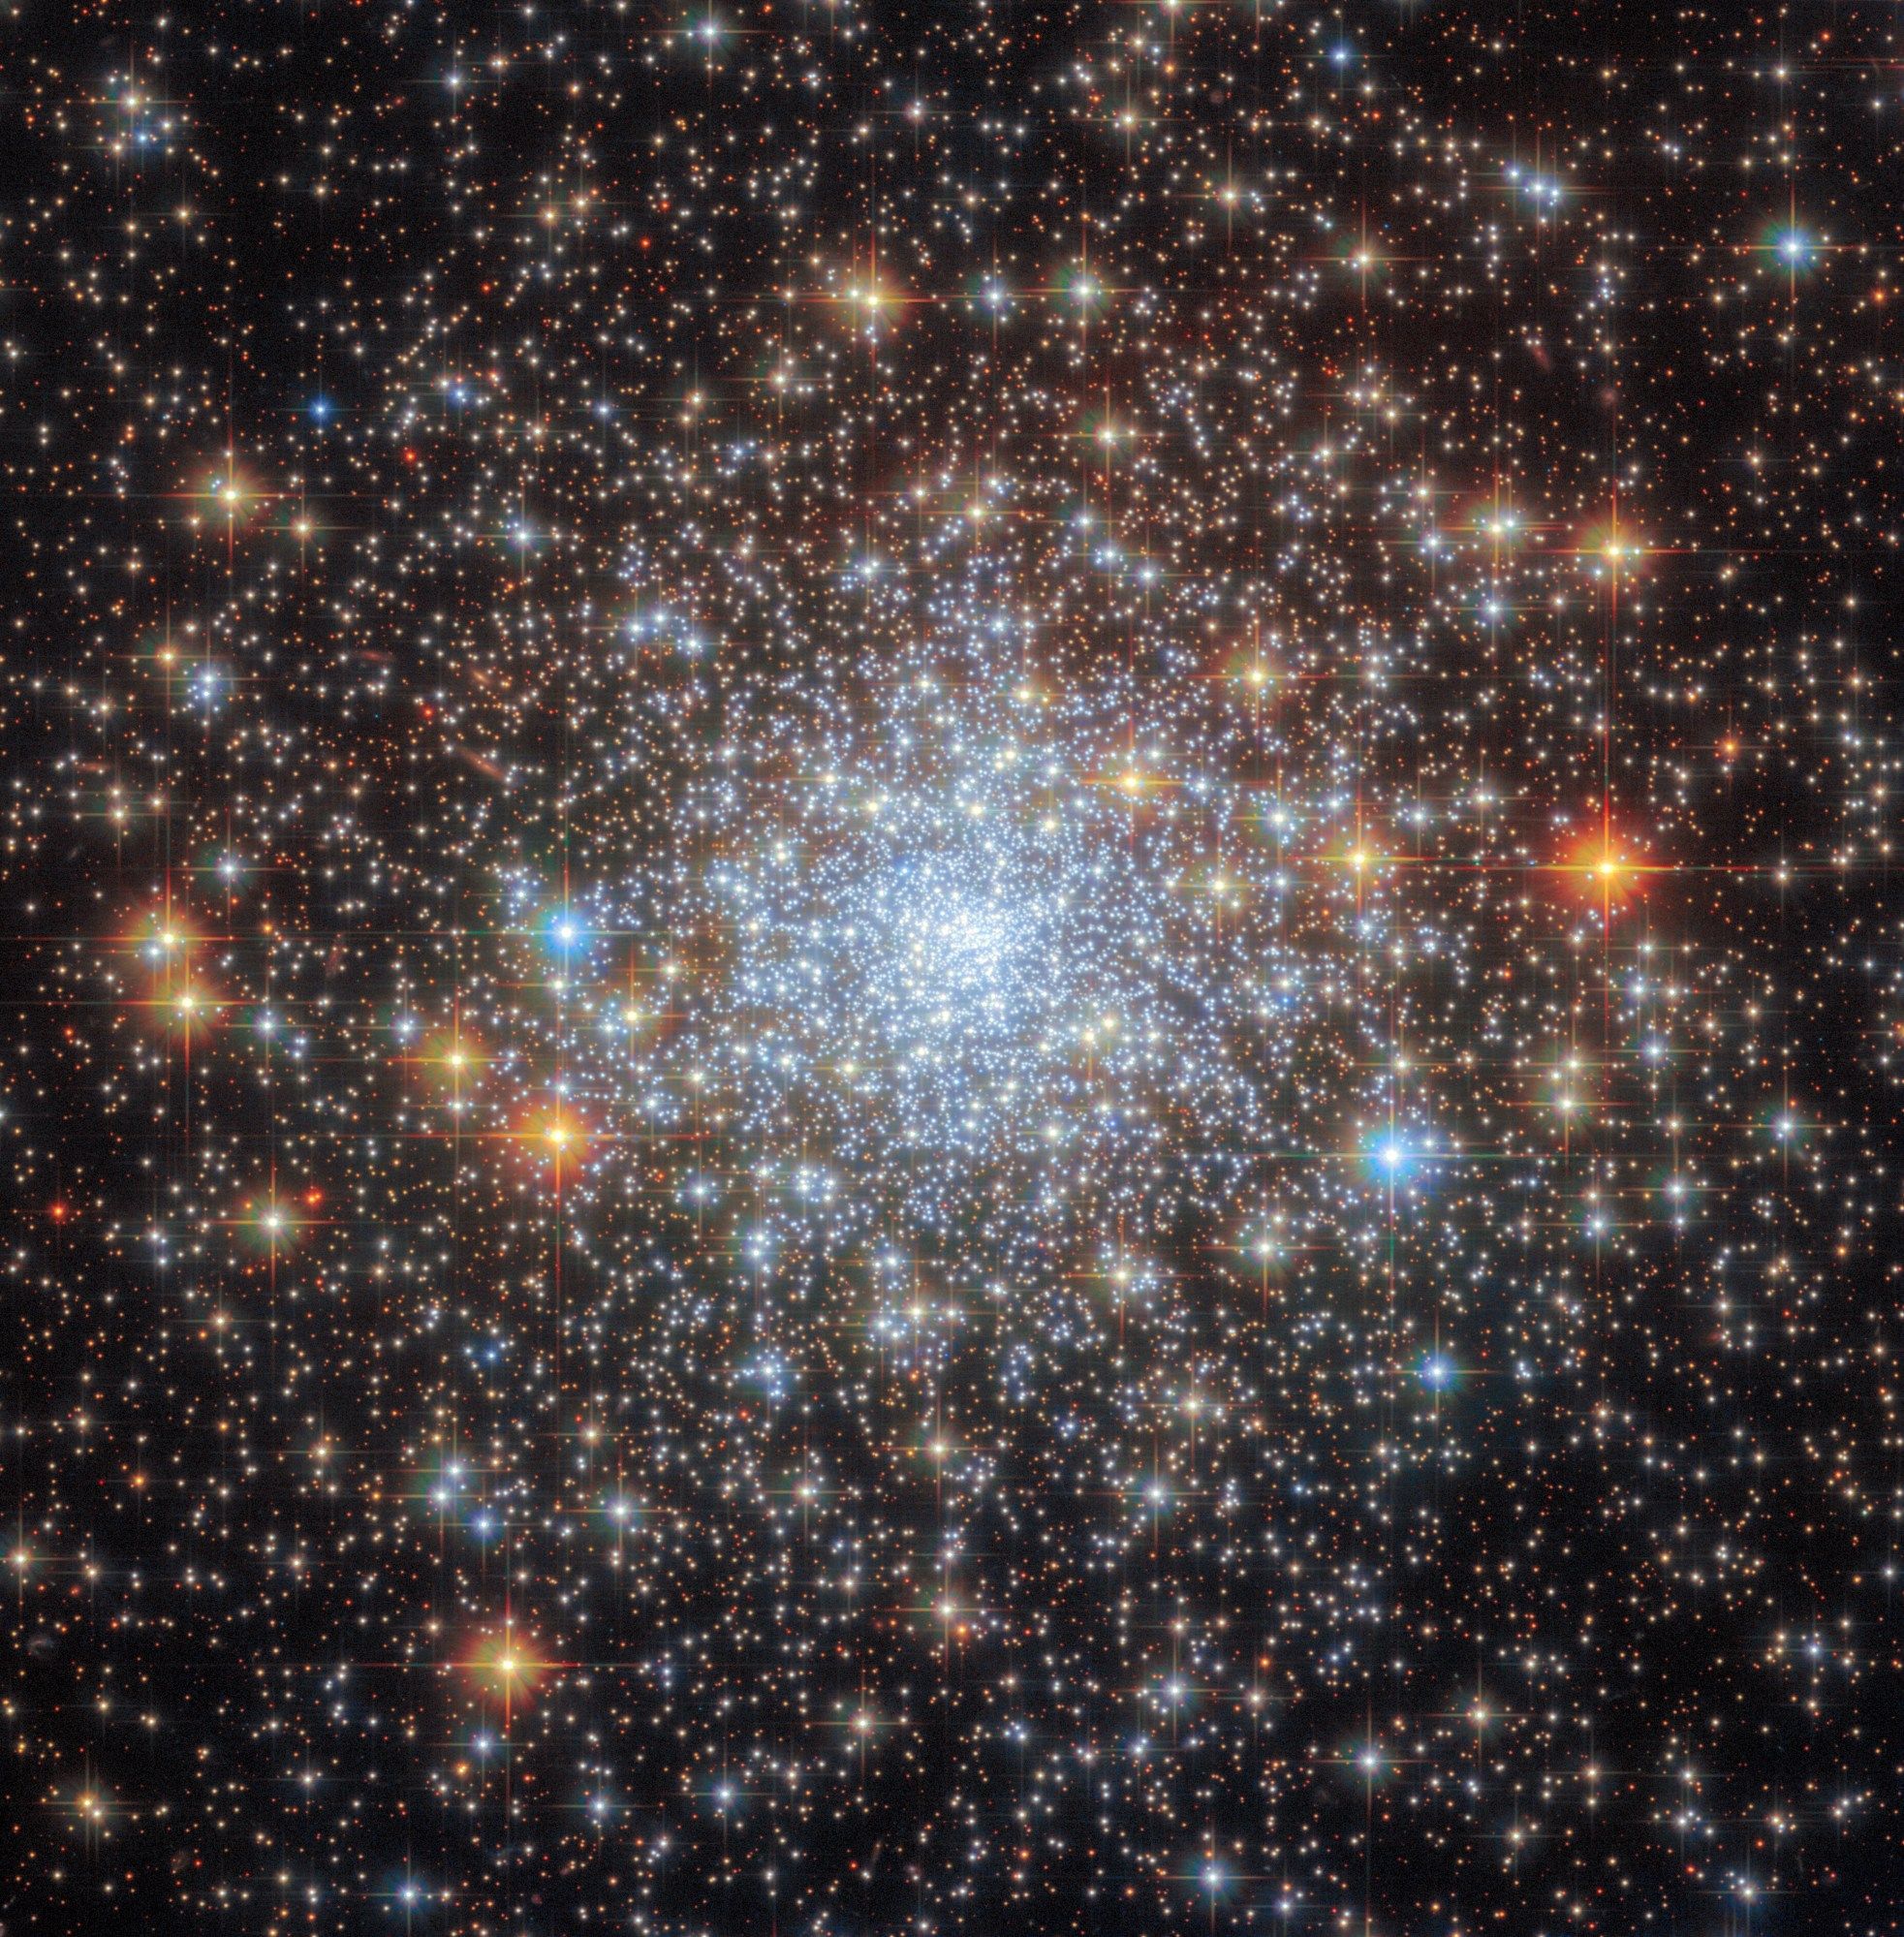 A dense spherical cluster of stars. The stars merge into a bright core in the center, and spread out to the edges gradually, giving way to an empty, dark background. Most of the stars are small points of light. A few stars with cross-shaped diffraction spikes appear larger and stand out in front.